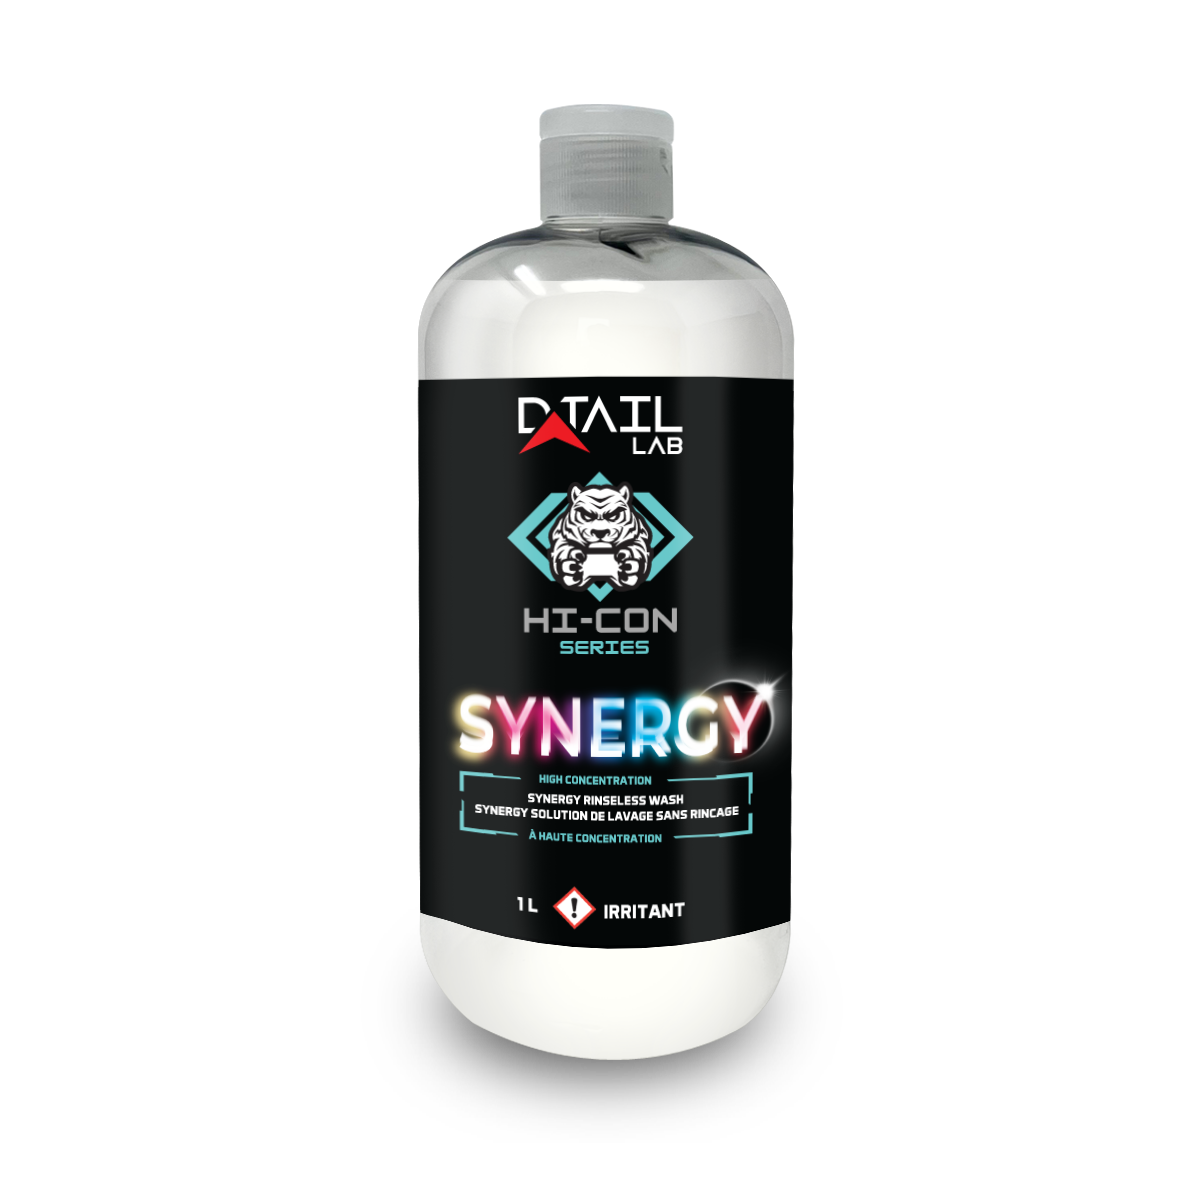 SYNERGY Rinseless Wash Concentrate - HI-Con Series